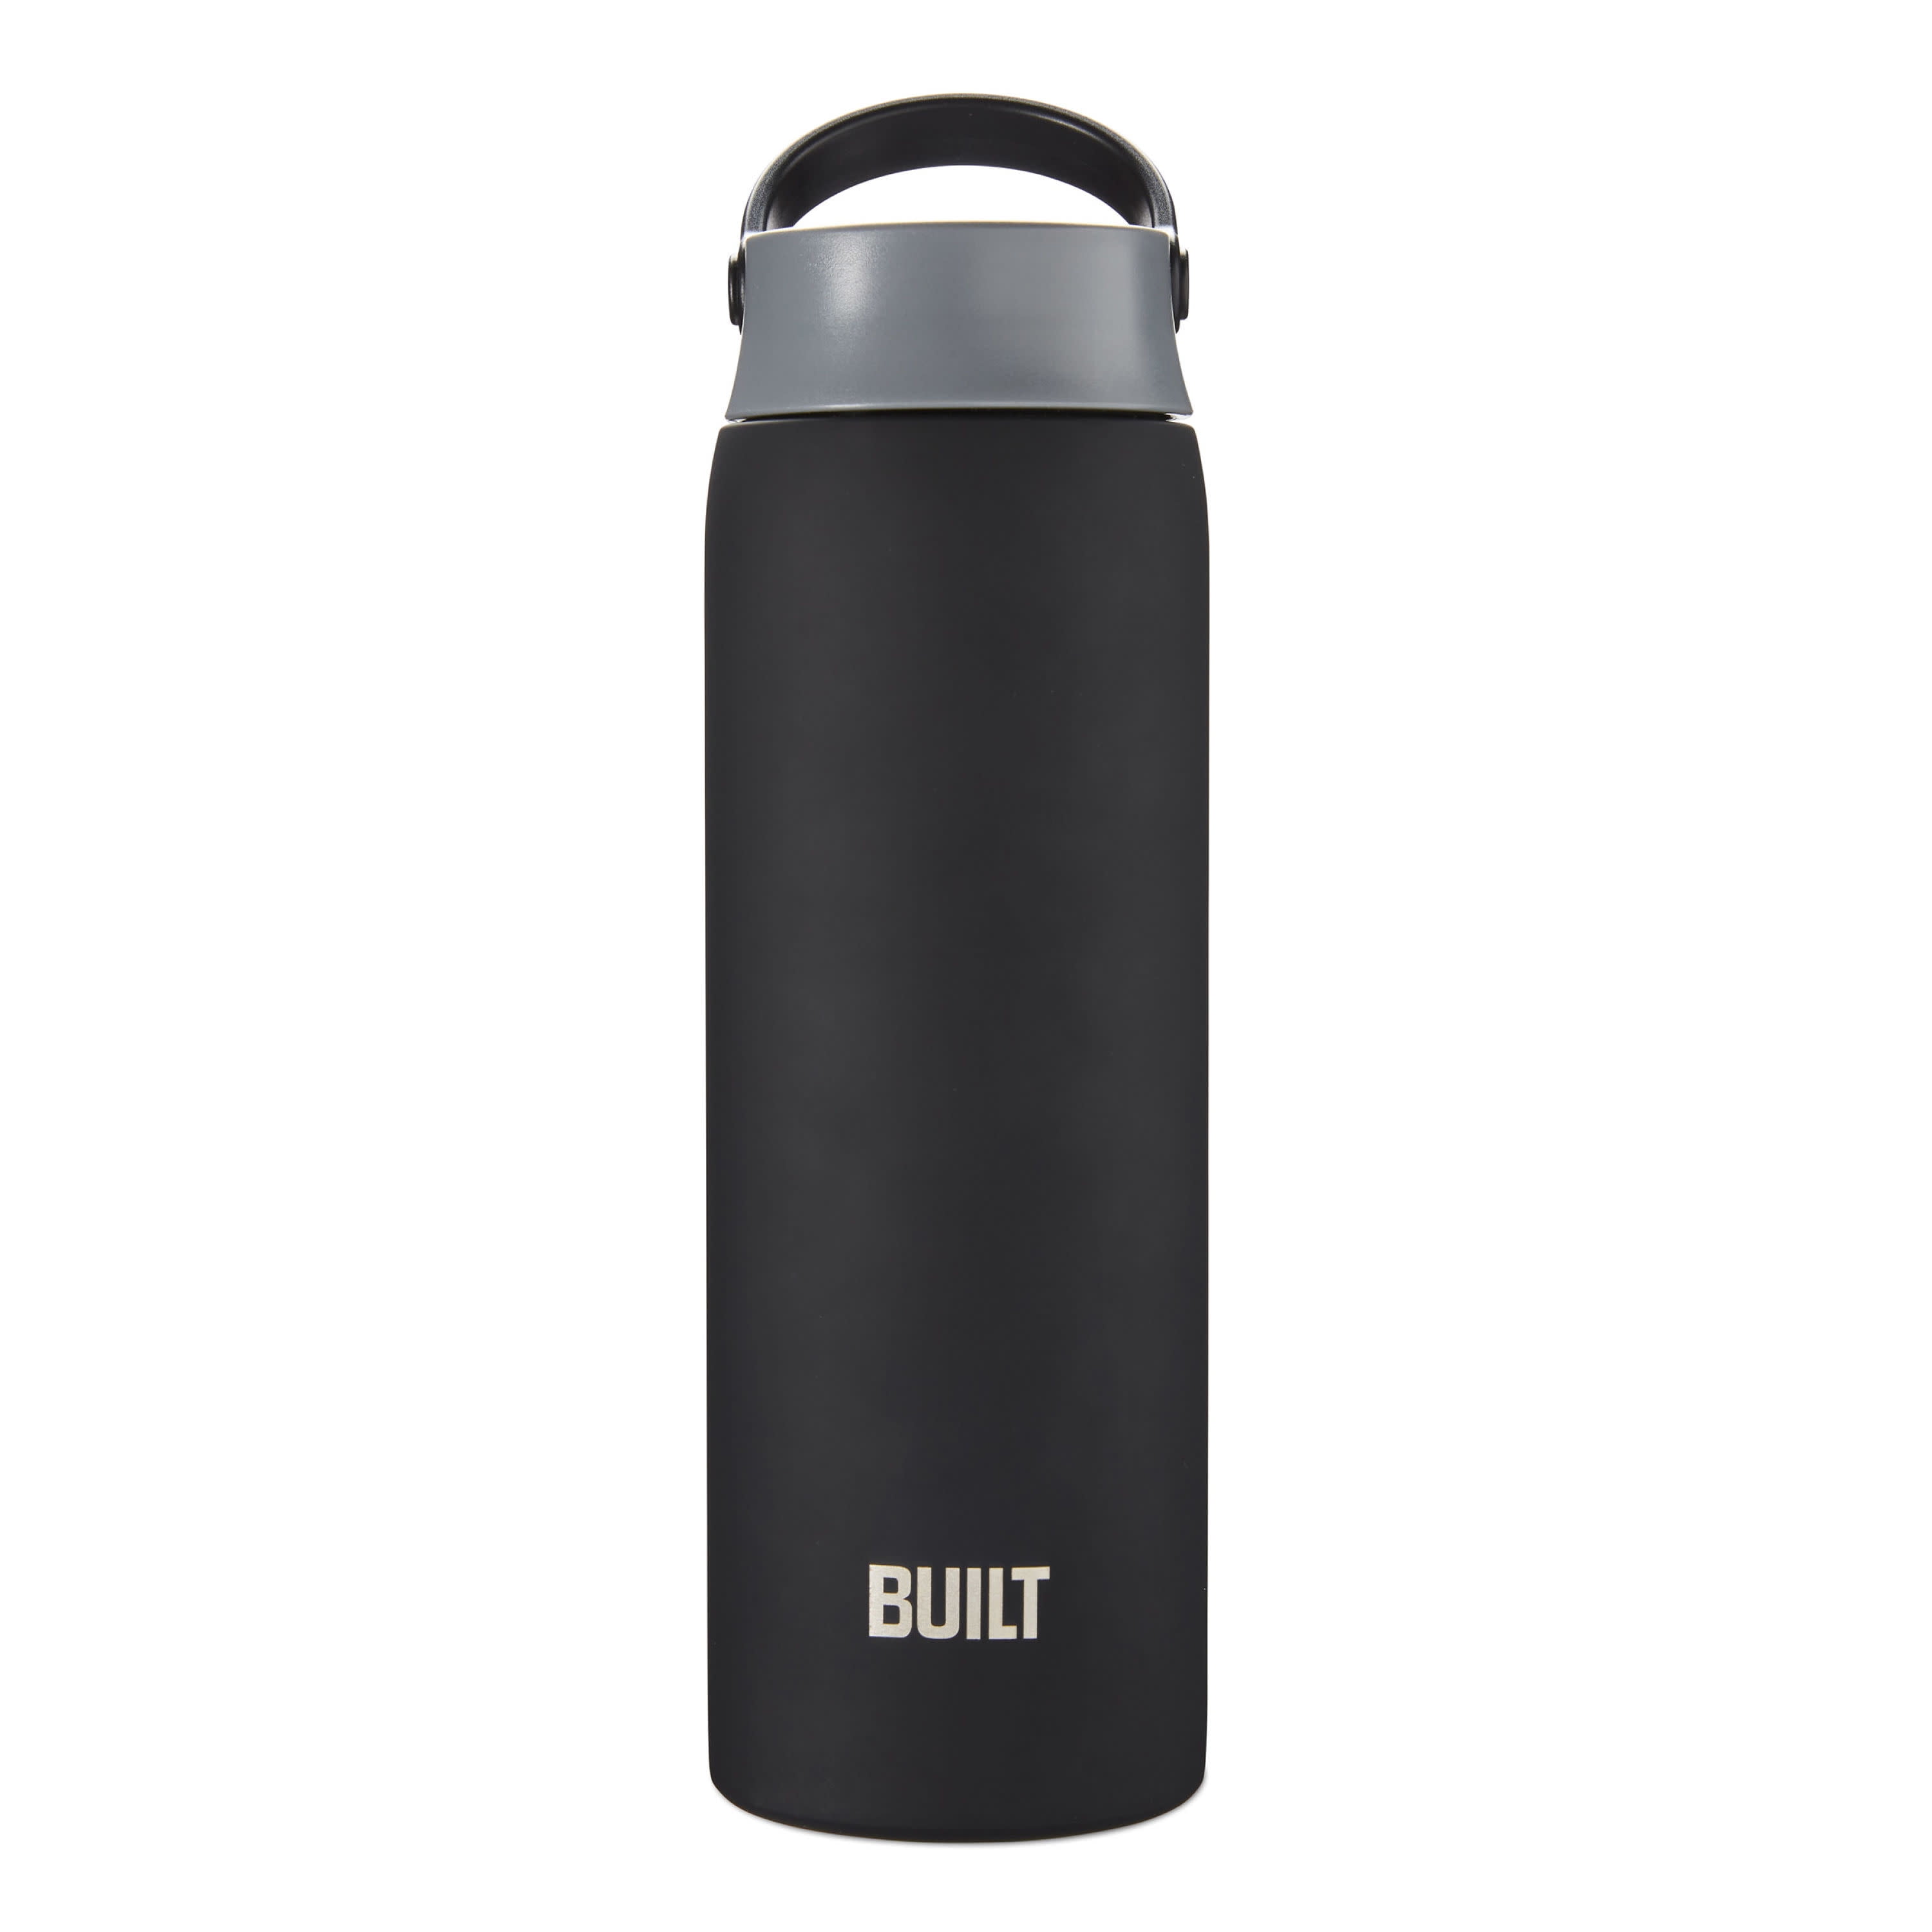 Complete Home 20 Ounce Double Wall Stainless Steel Bottle - Each